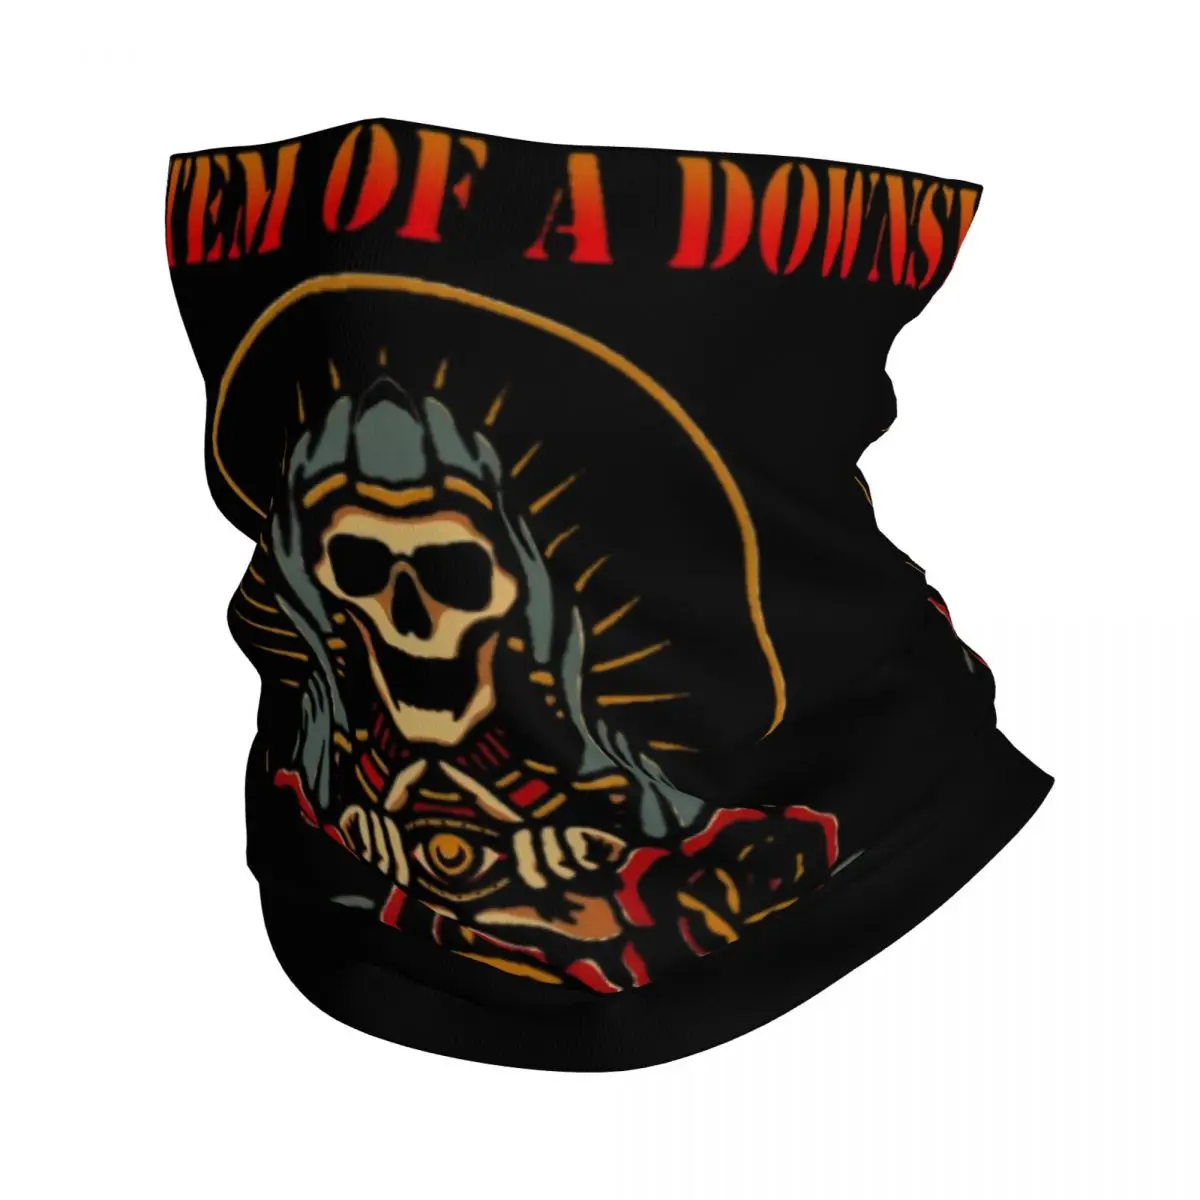 Skull SOAD Heavy Metal Wrap Scarf Accessories Neck Cover System Of A Down Band Bandana Riding Headwear for Men Women All Season